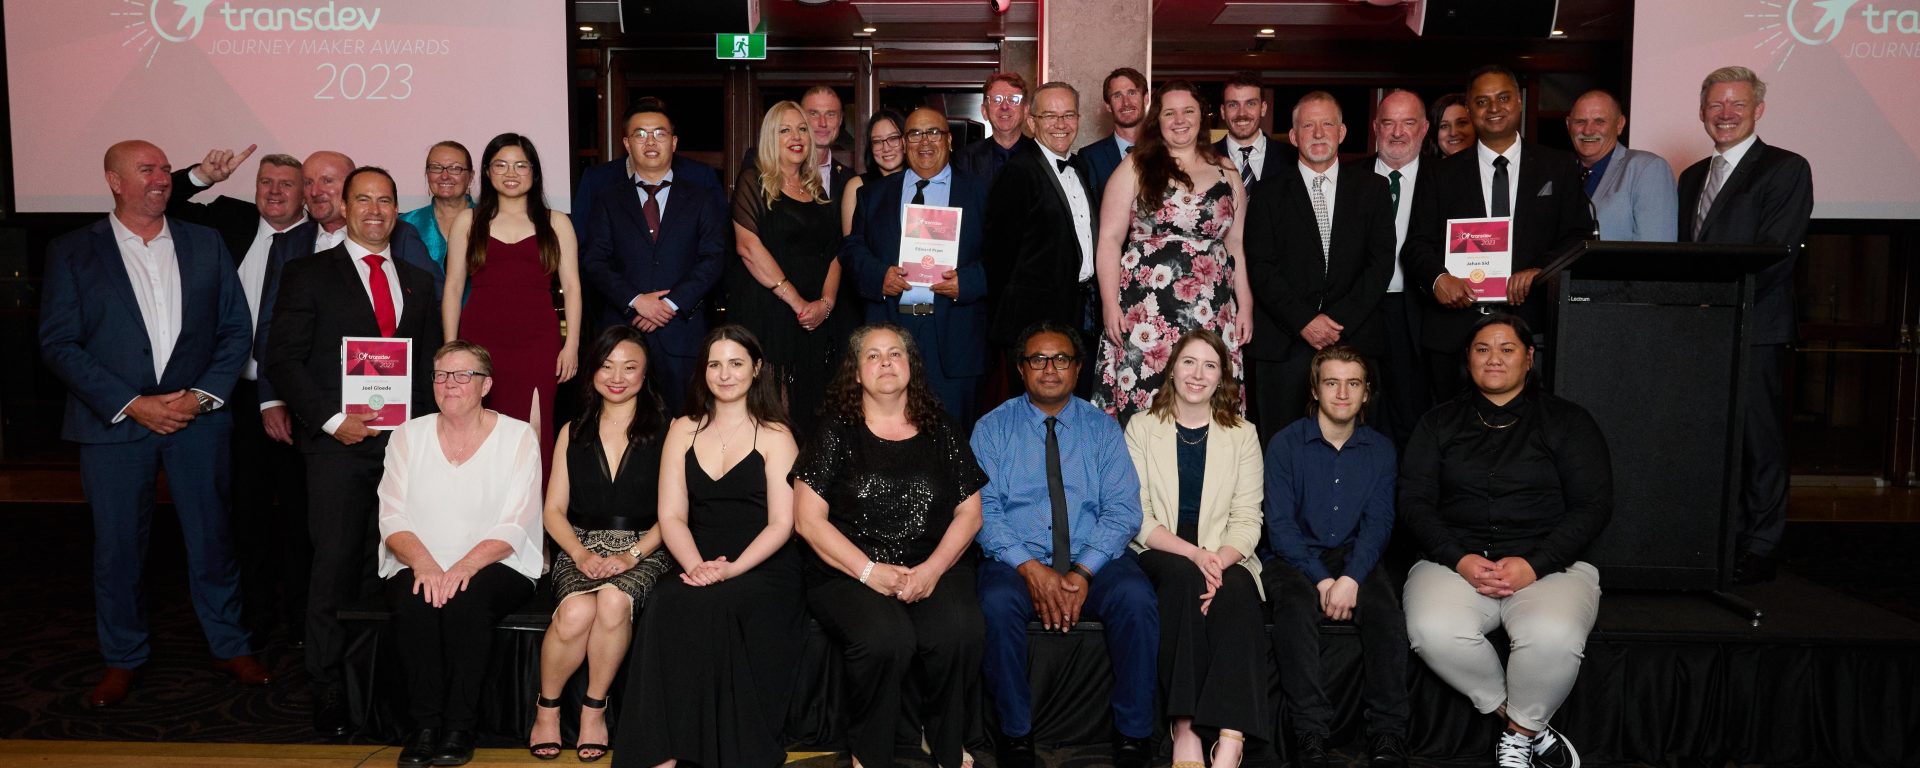 Employees of Transdev Australia and New Zealand who were finalists or winners in staff recognition awards.